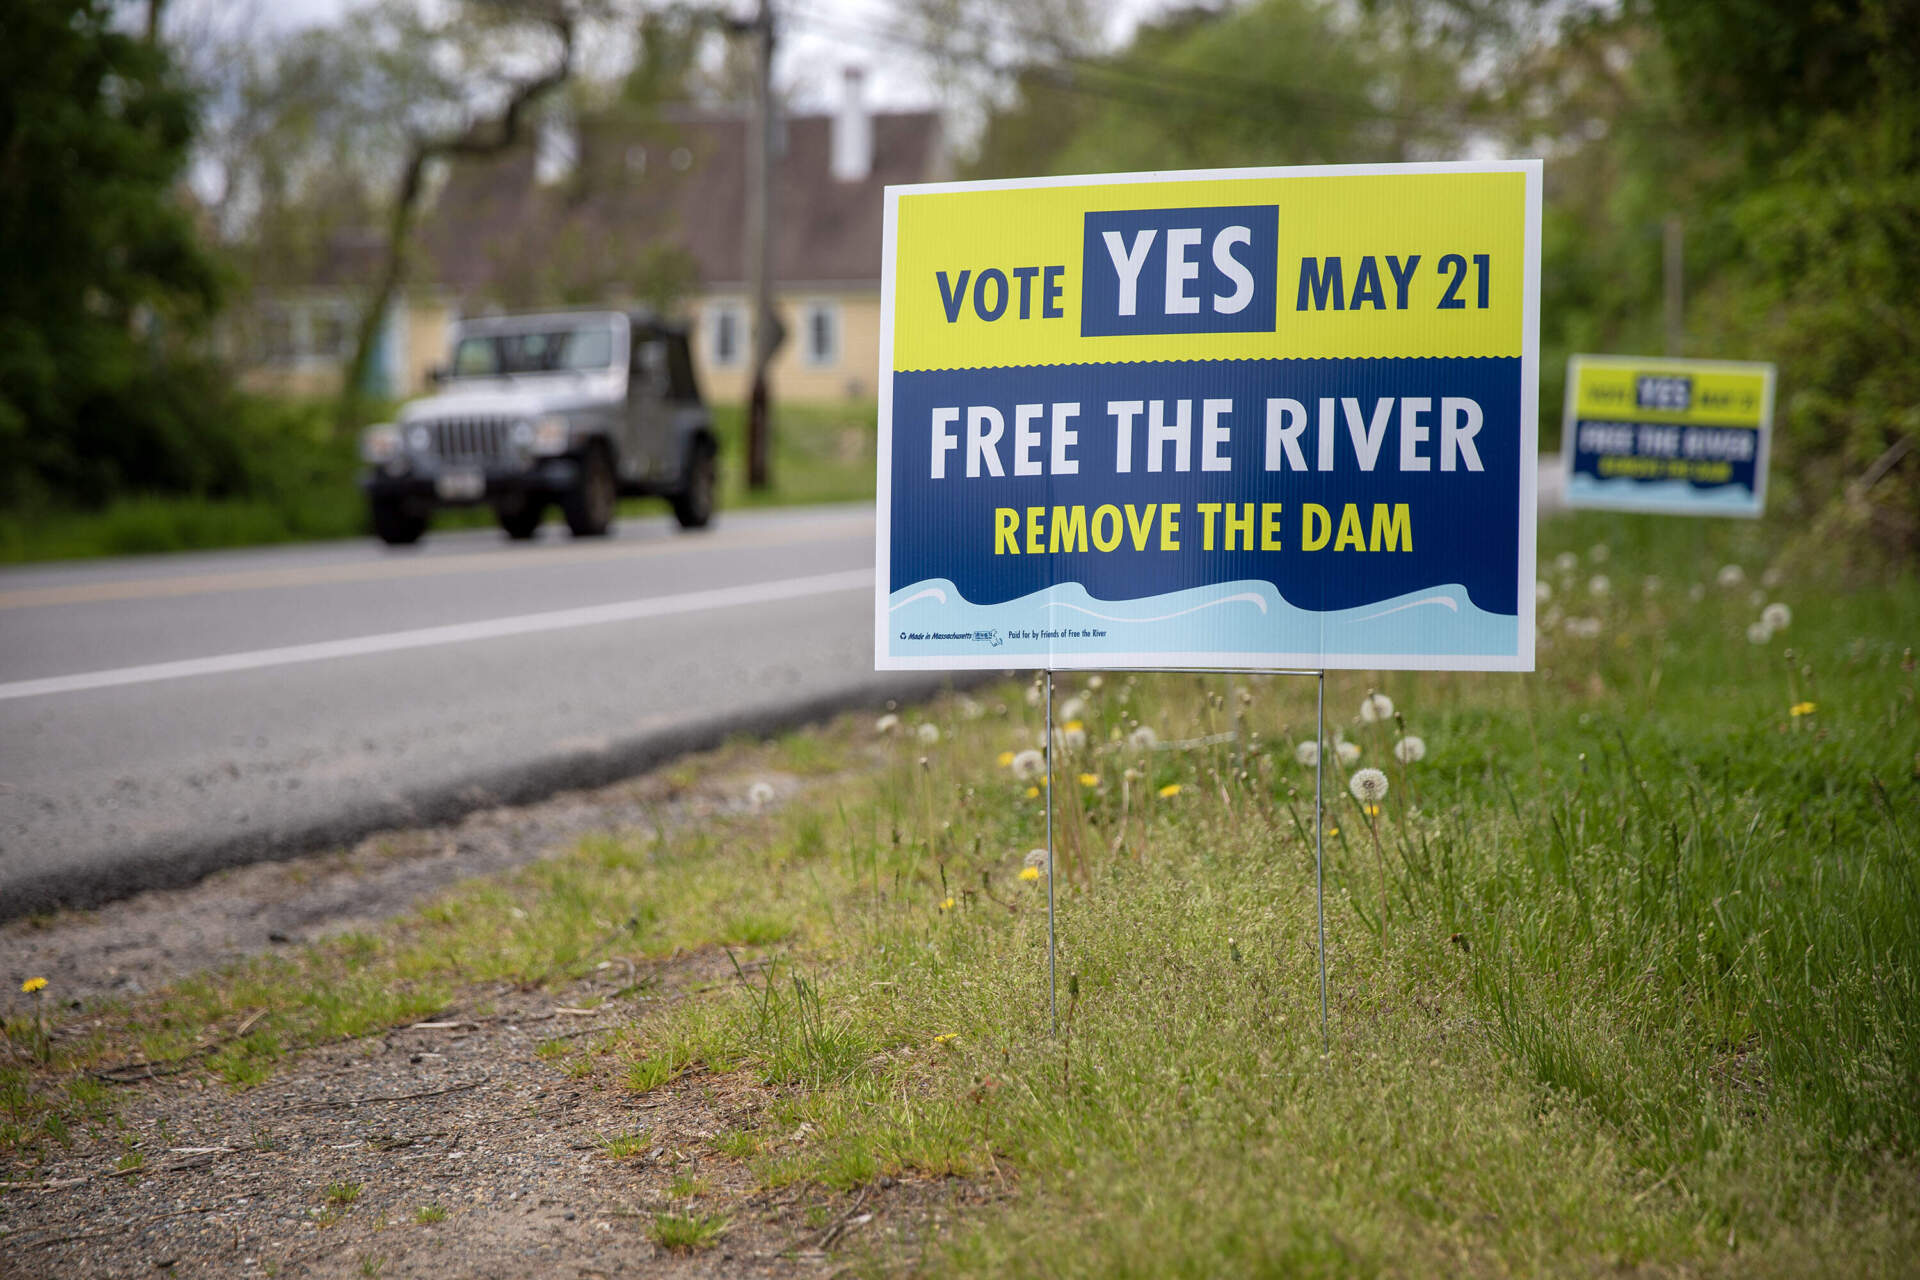 A campaign sign to remove the Ipswich Mills Dam stands at the side of the road in Ipswich. (Robin Lubbock/WBUR)